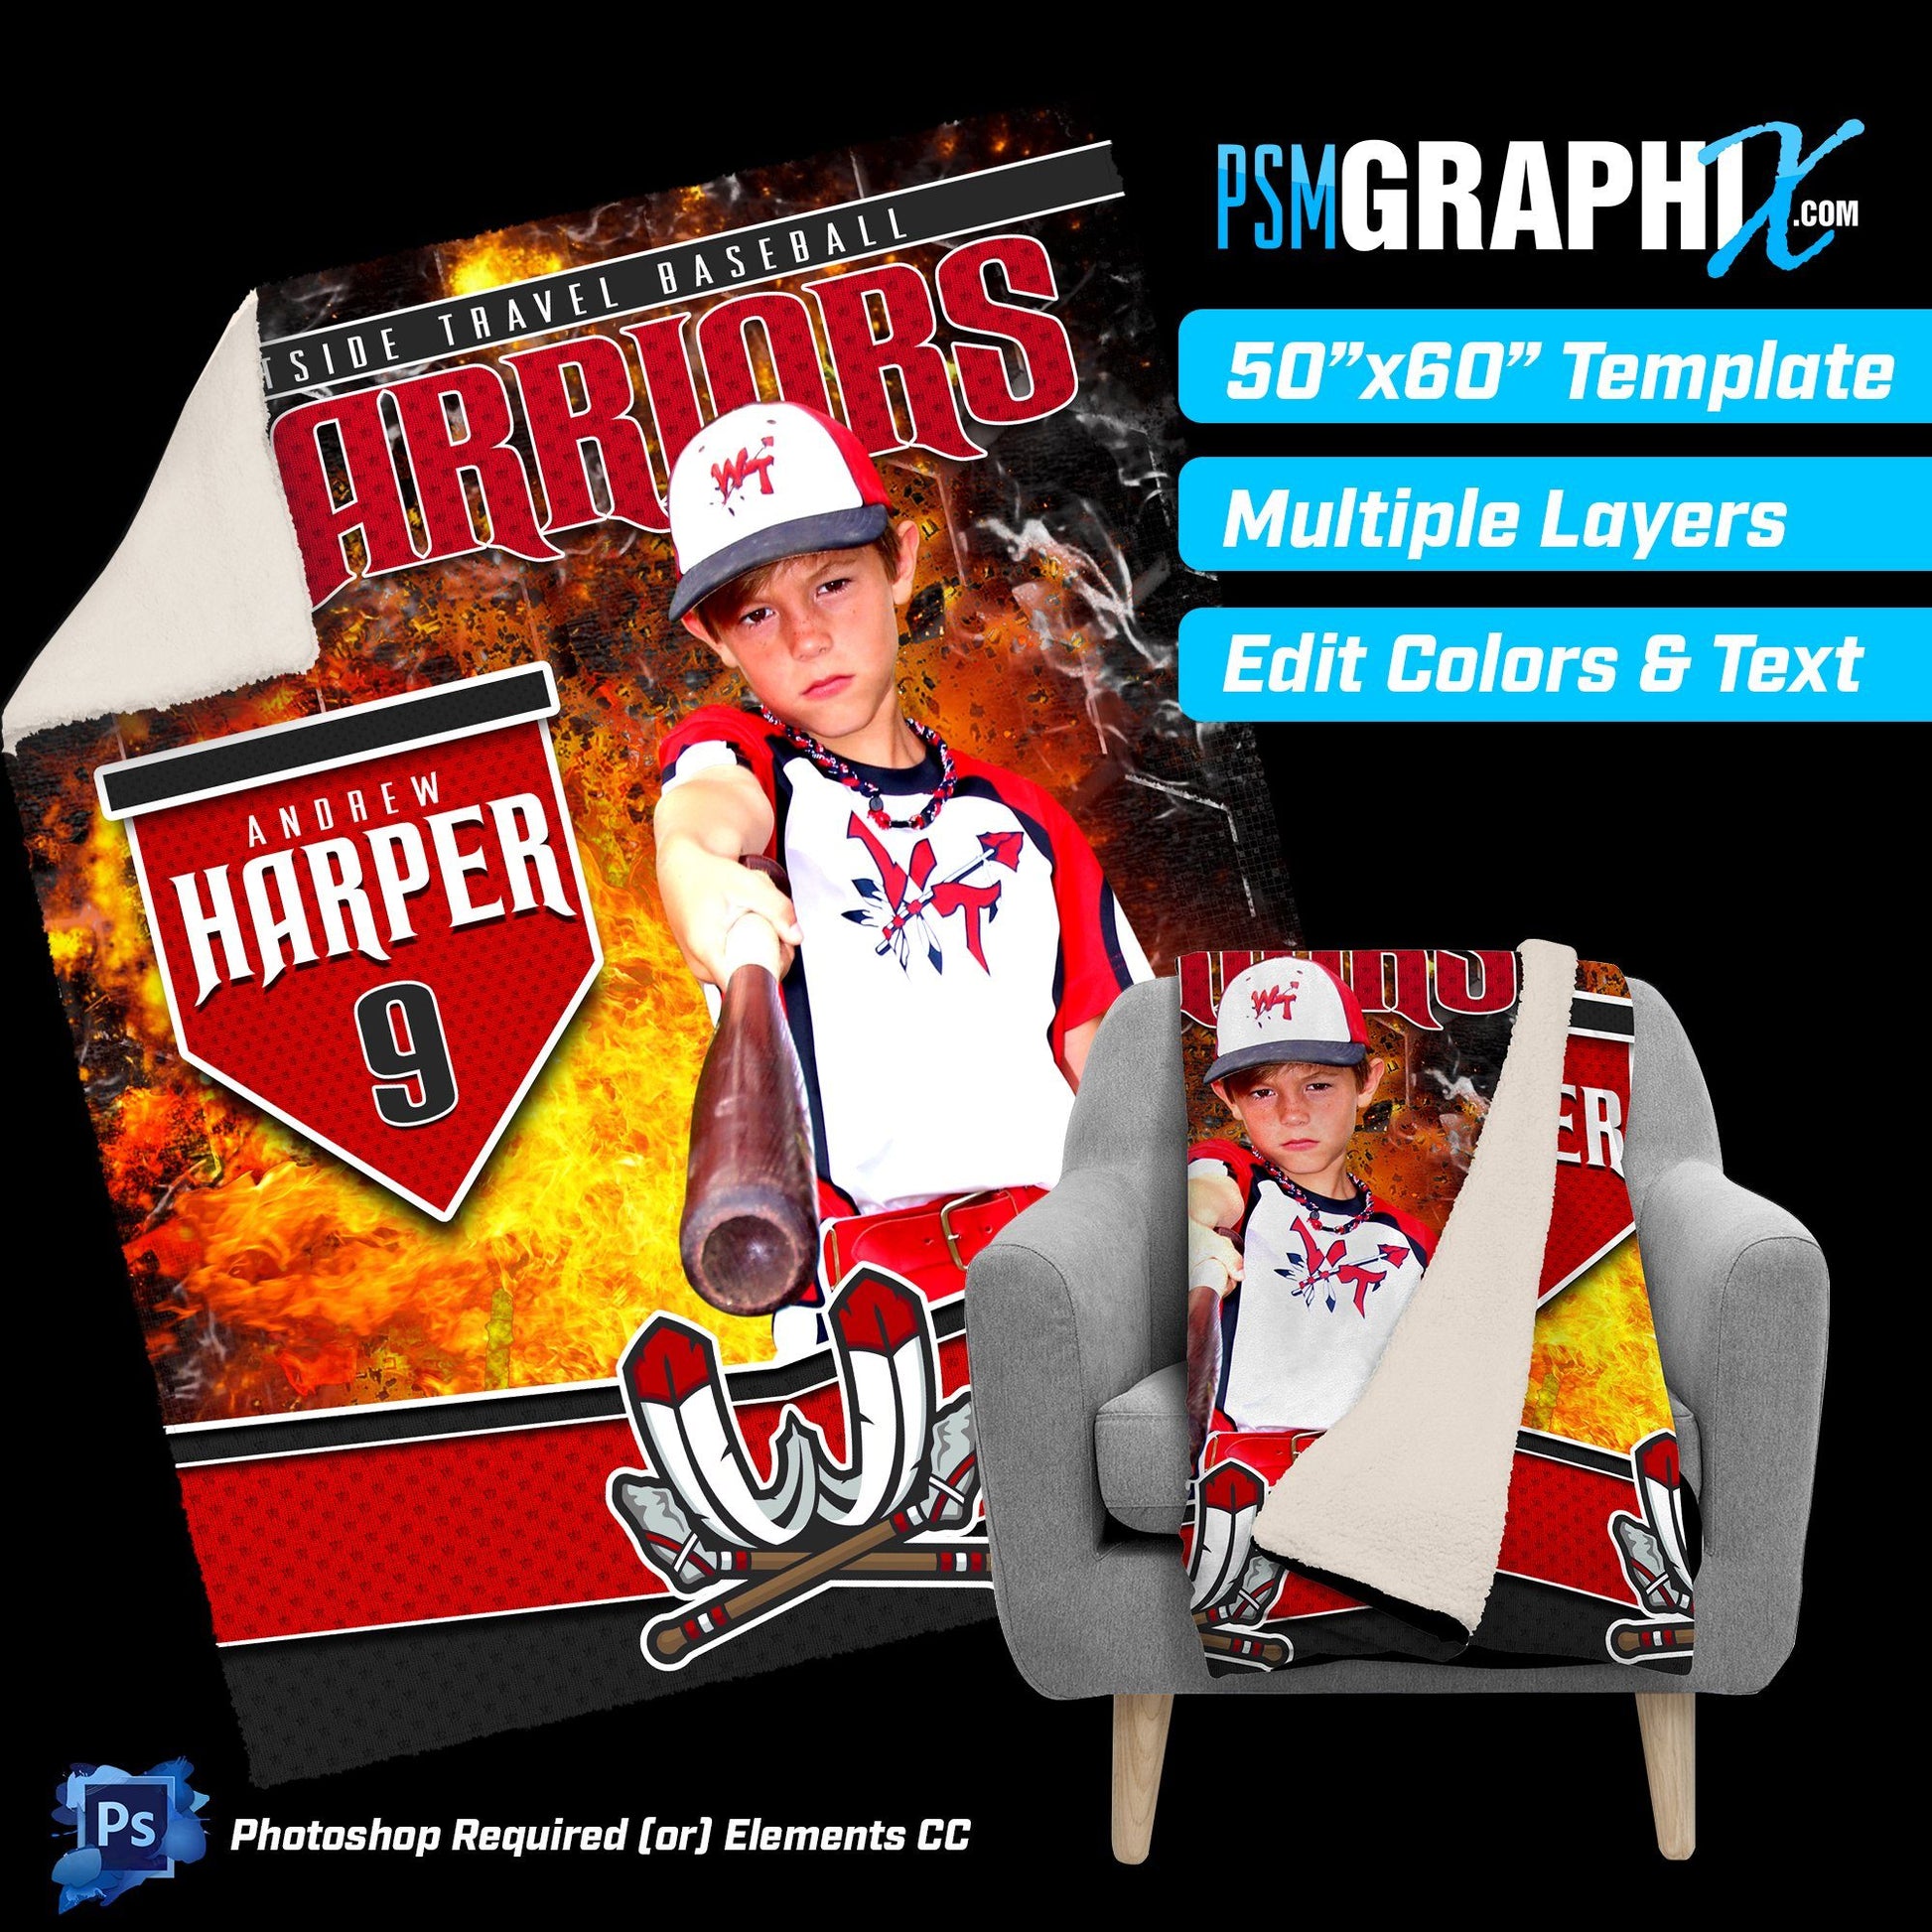 V3 - Inferno - 50"x60" Blanket Template-Photoshop Template - PSMGraphix